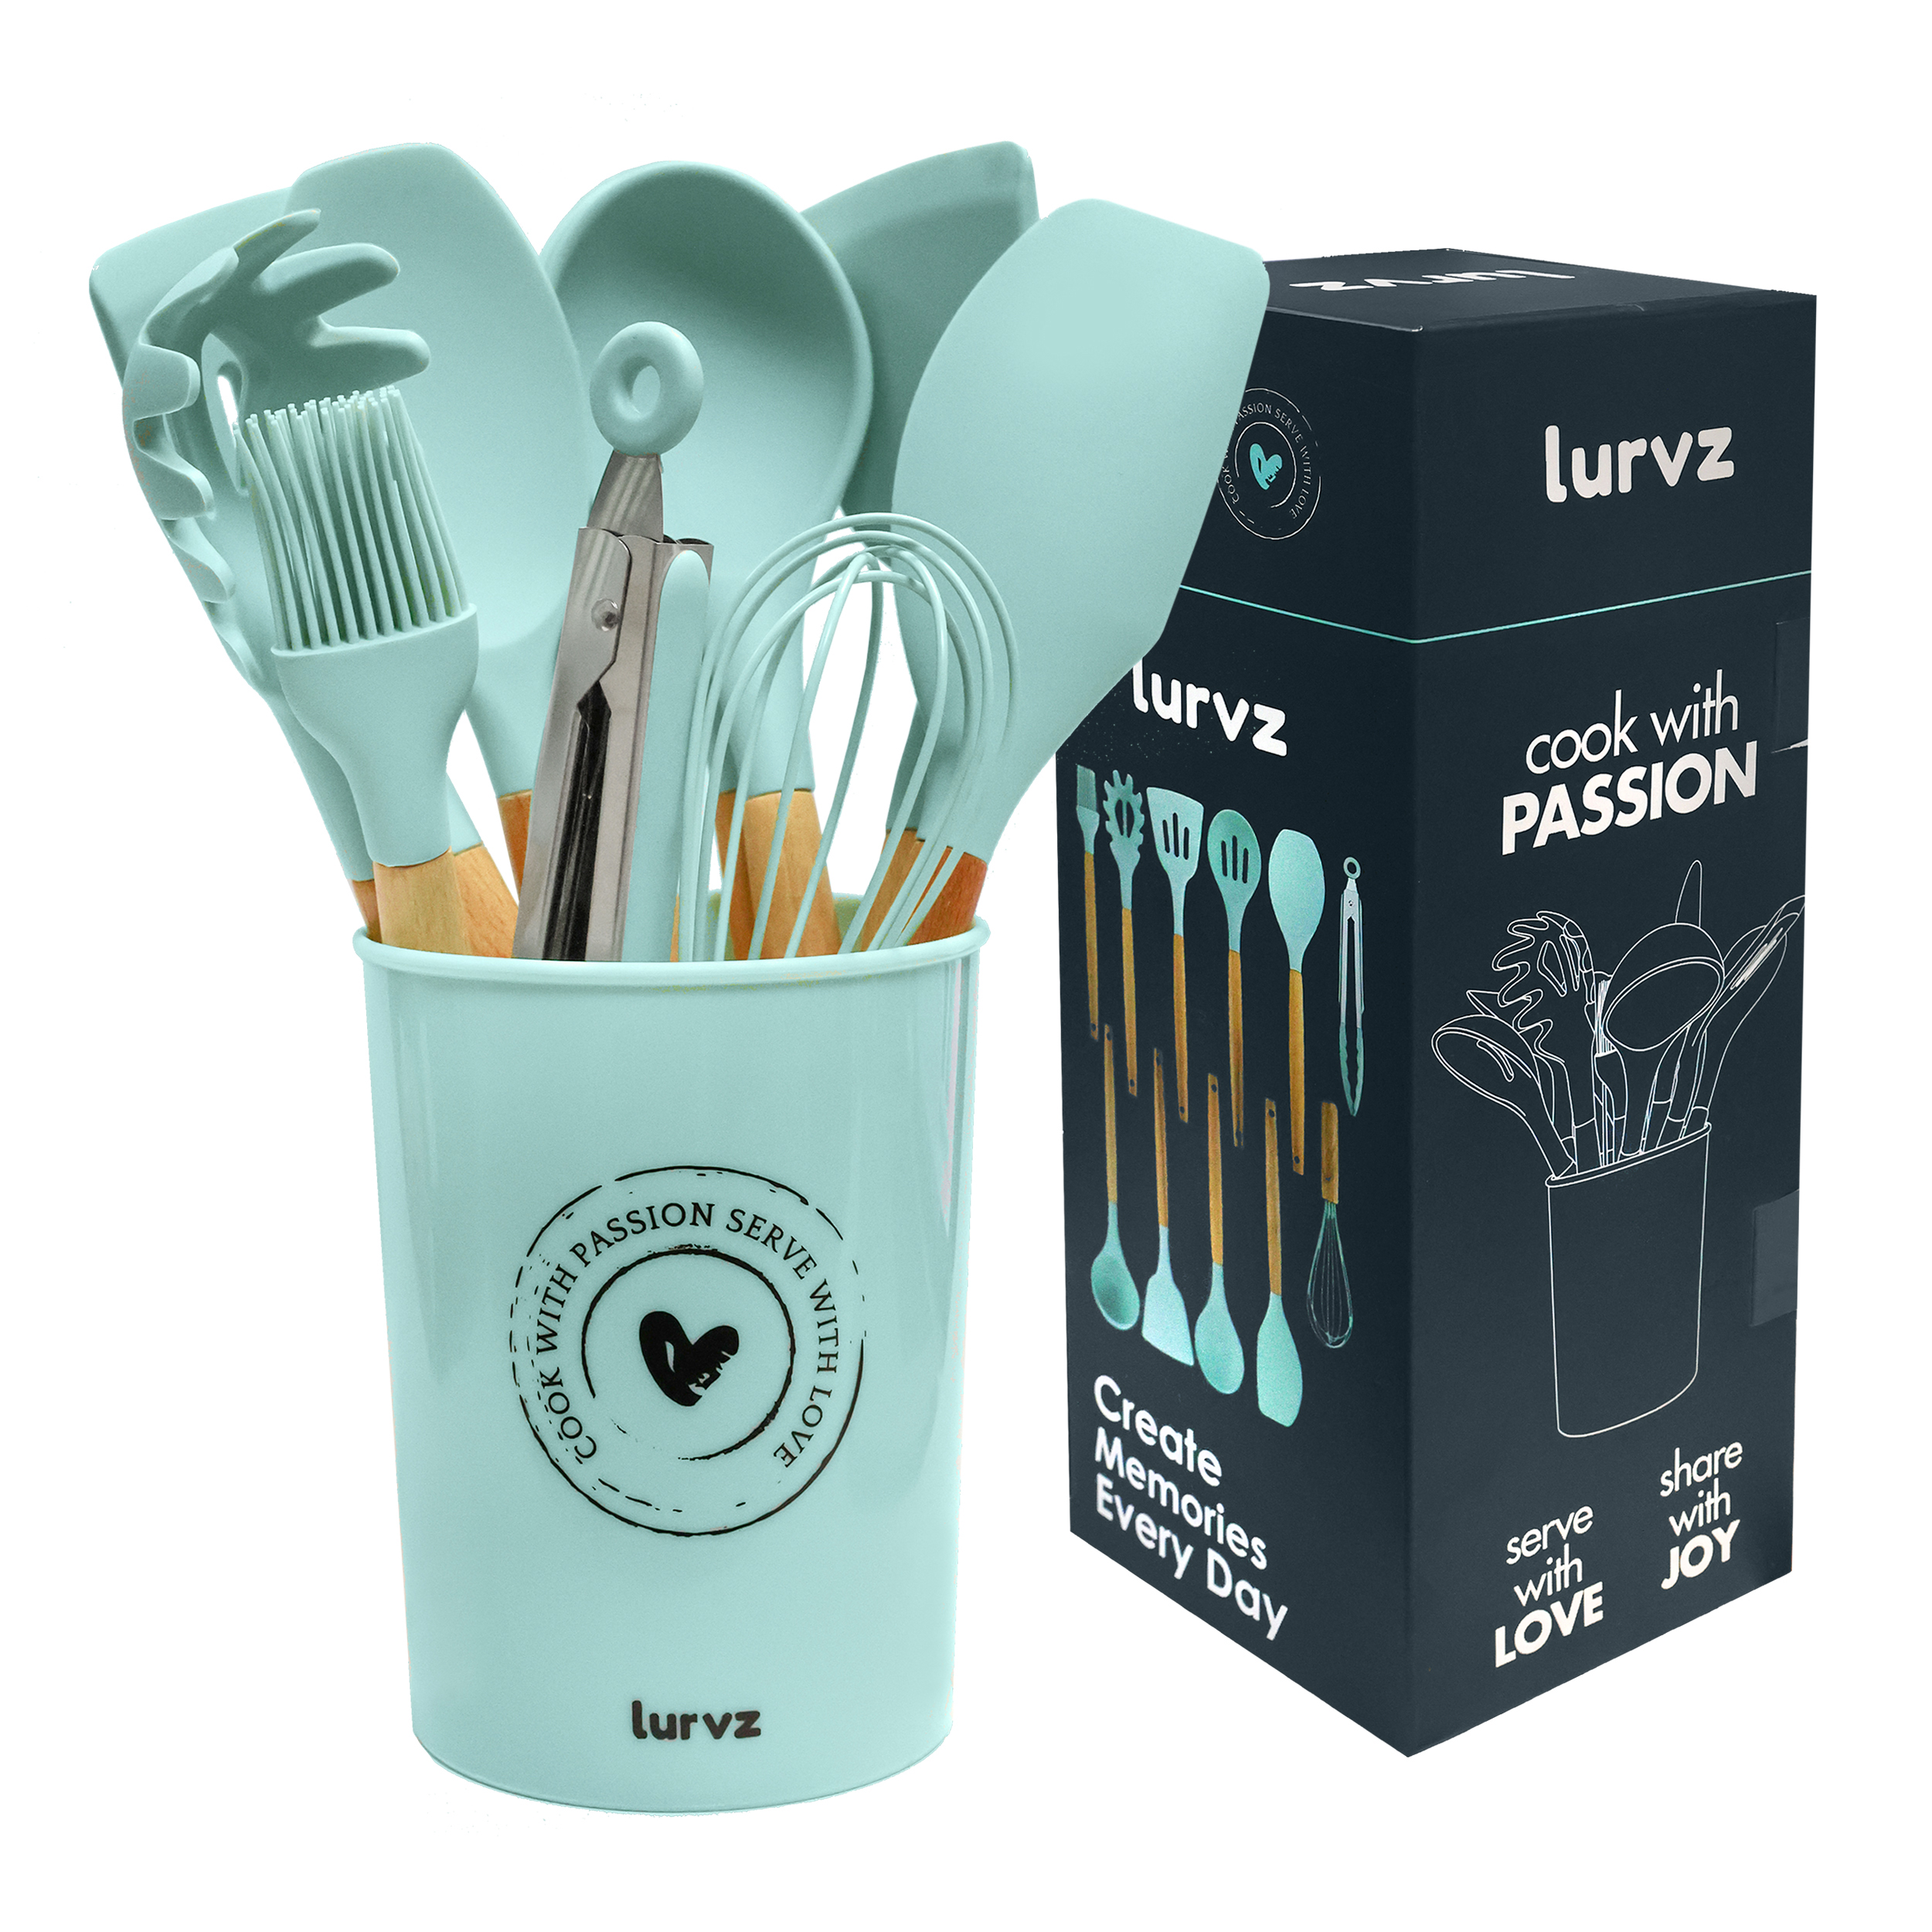 Lurvz 12-Piece Silicone Utensils Set Giveaway! #MySillyLittleGang